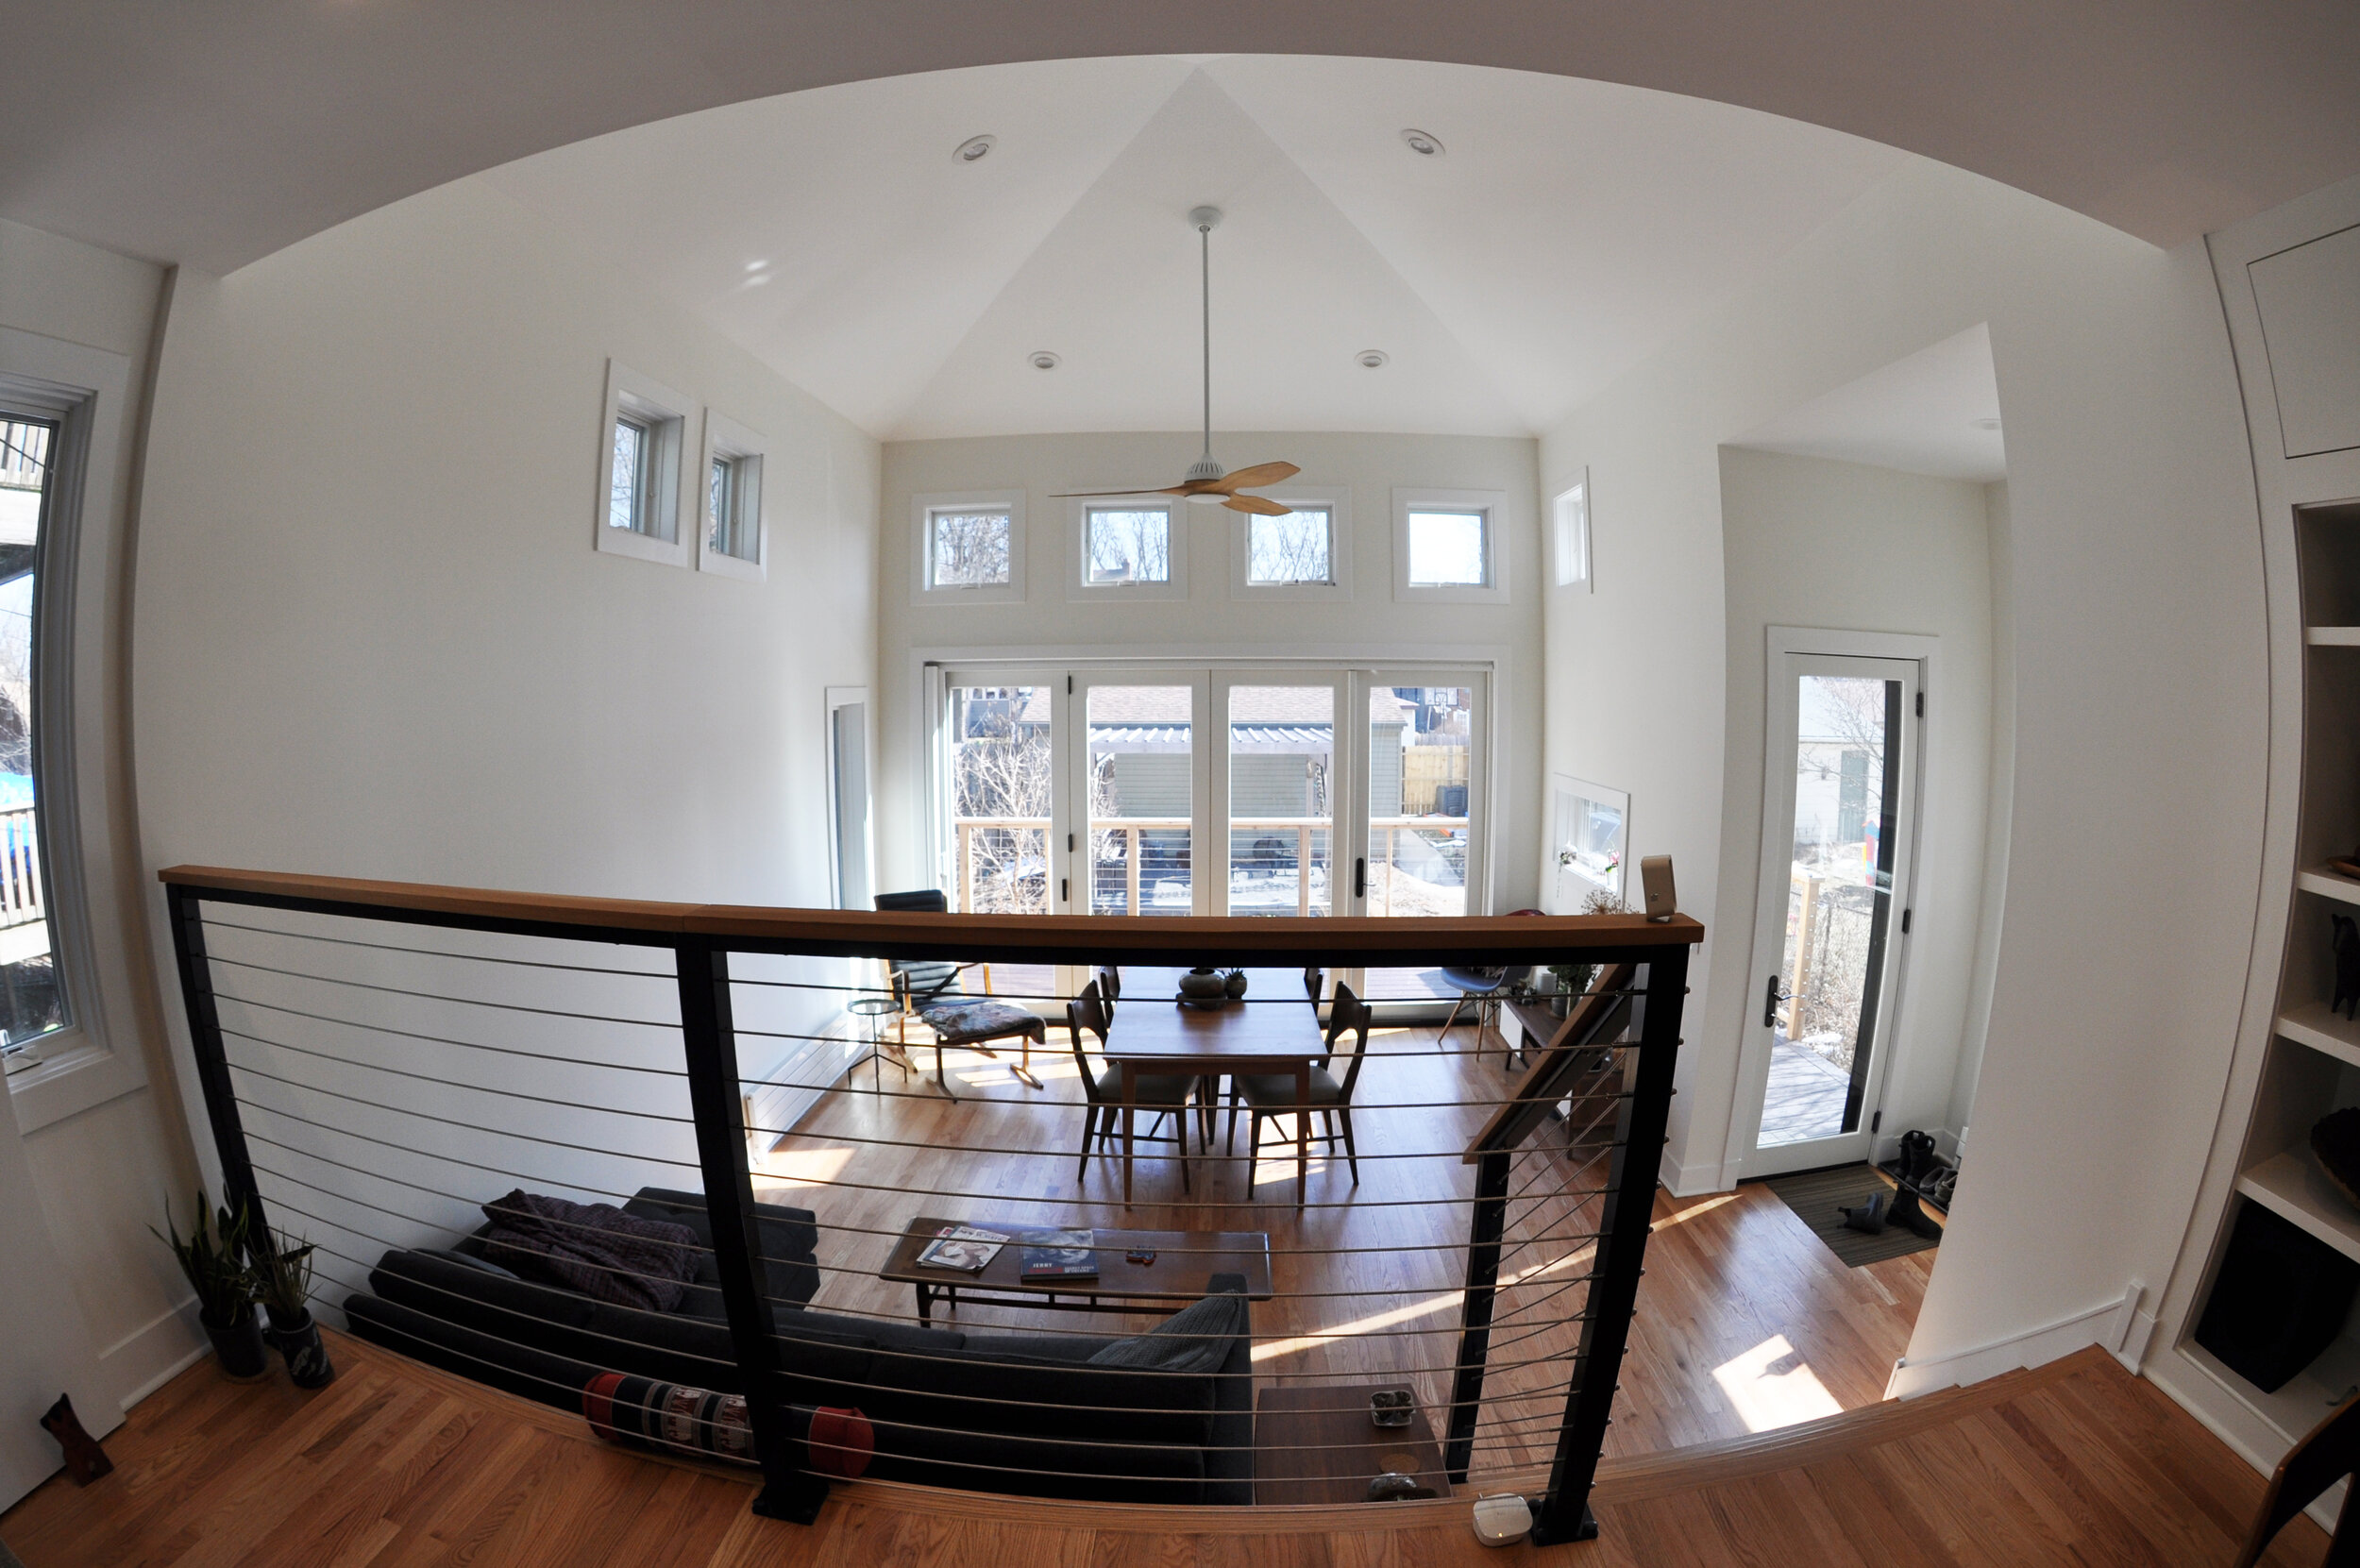 fisheye view of living space with tall ceilings, french doors, many windows, hardwood floors